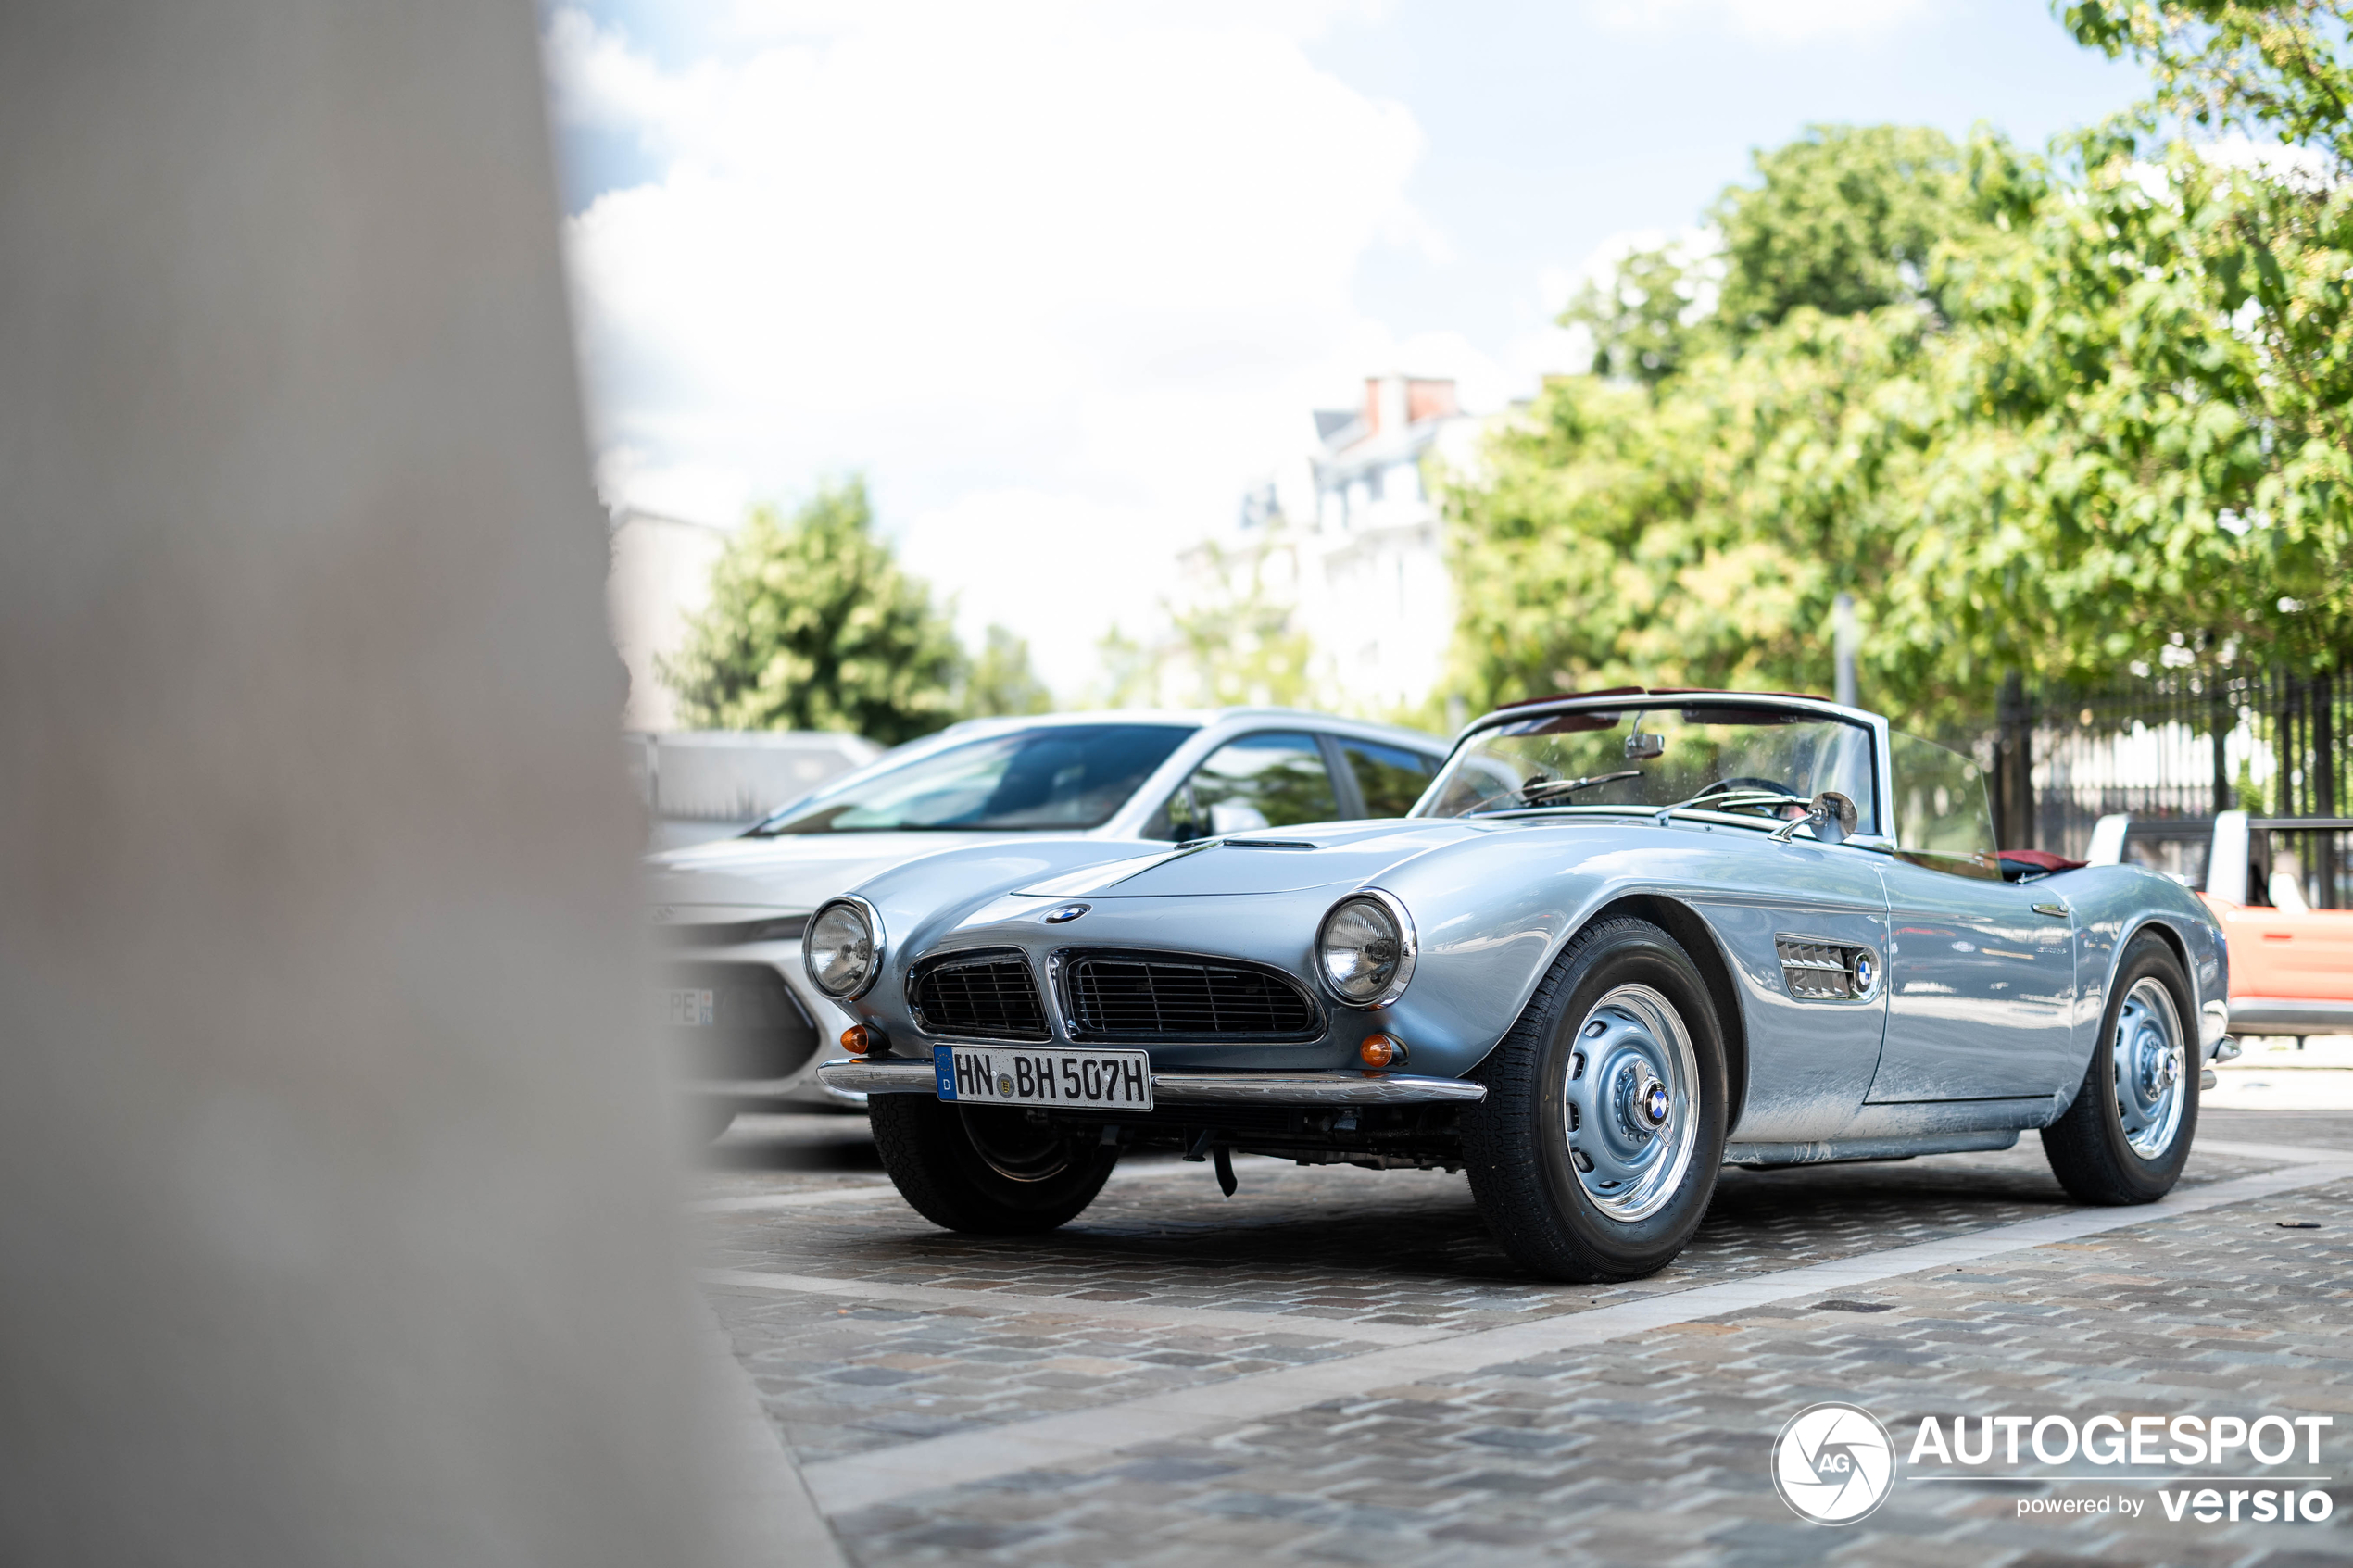 A rare BMW 507 is spotted in Épernay